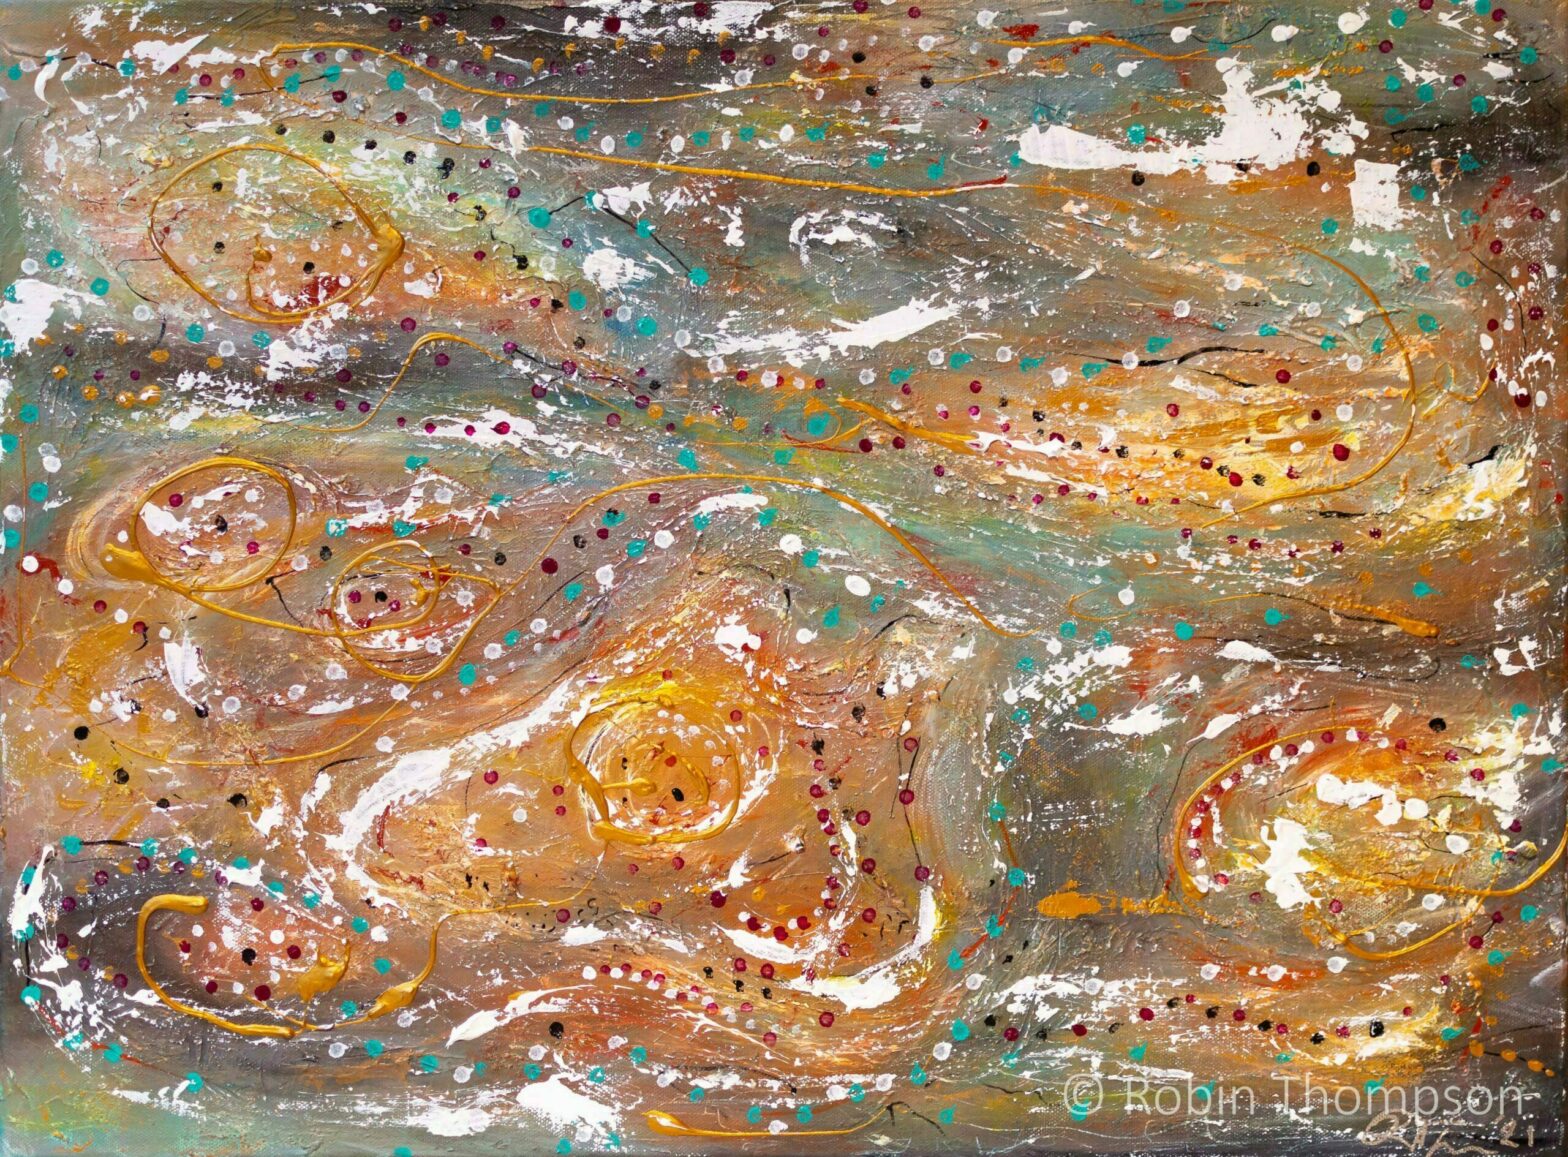 An abstract acrylic piece showing various lands appearing to be seen from above, with dots and lines scattered throughout. Purples, golds, whites and greens dominate.